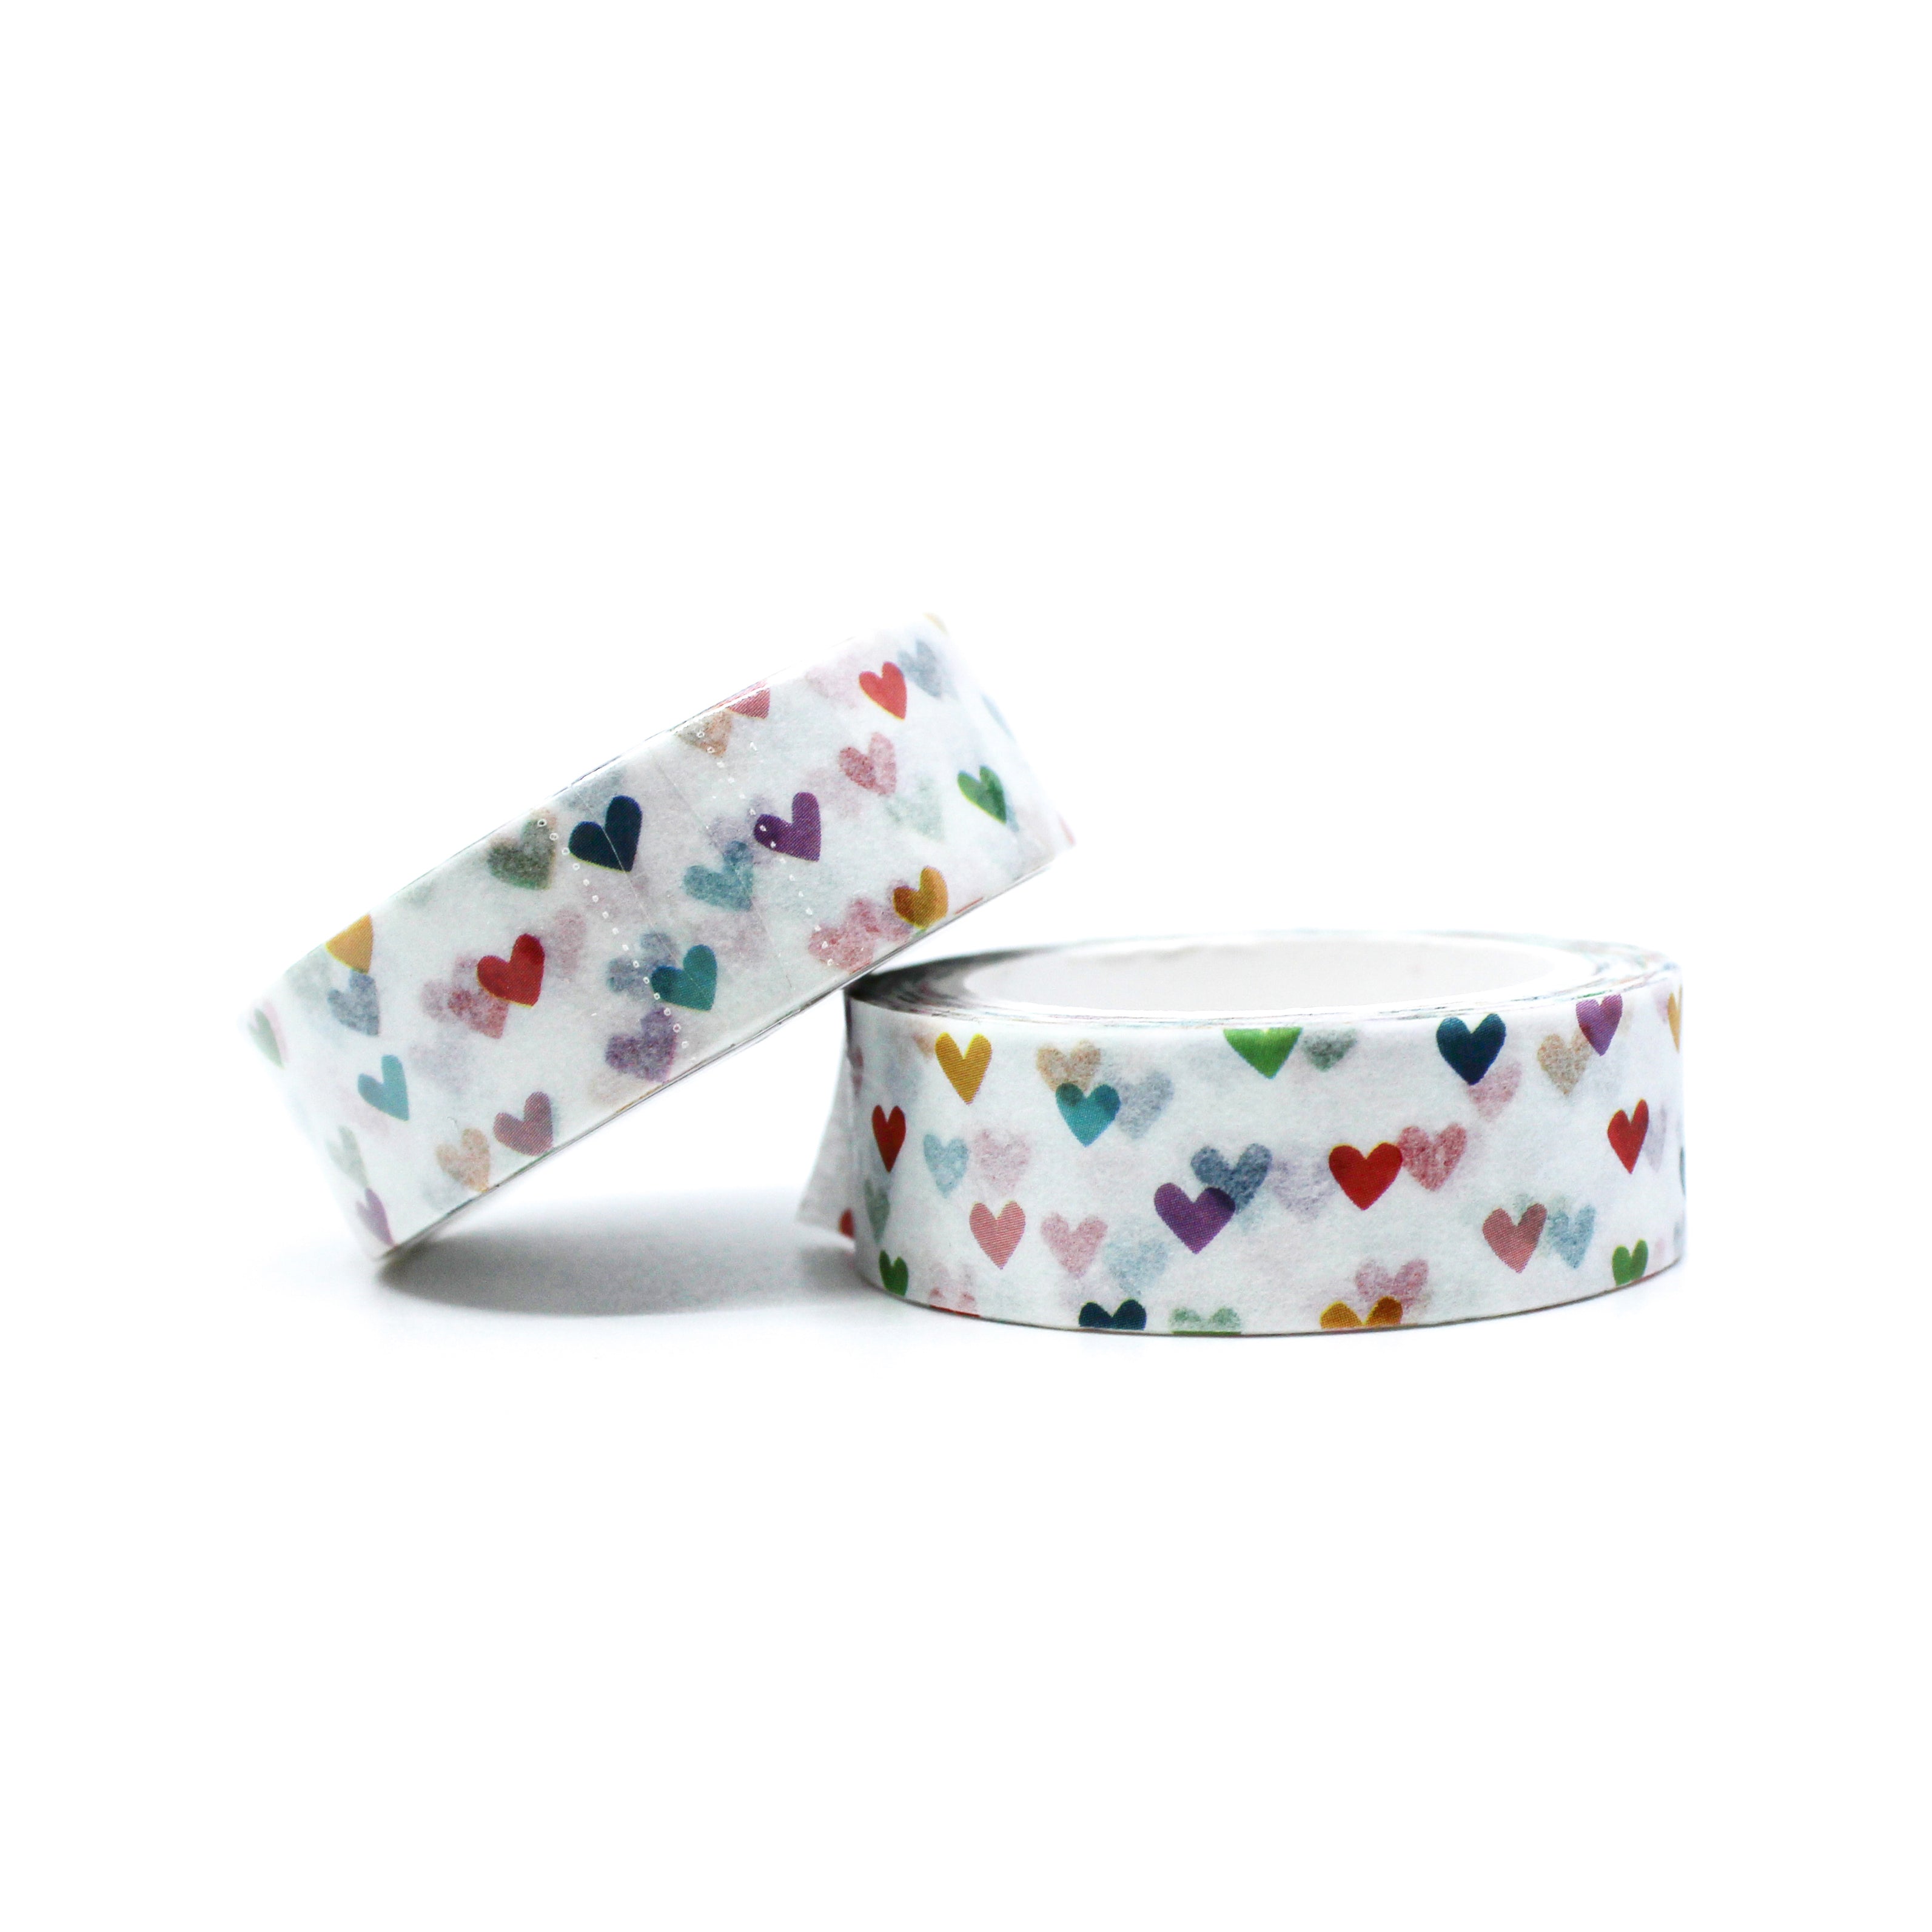 This is a view of our fun and colorful tiny rainbow hearts washi tapes from BBB Supplies craft and journaling shop.